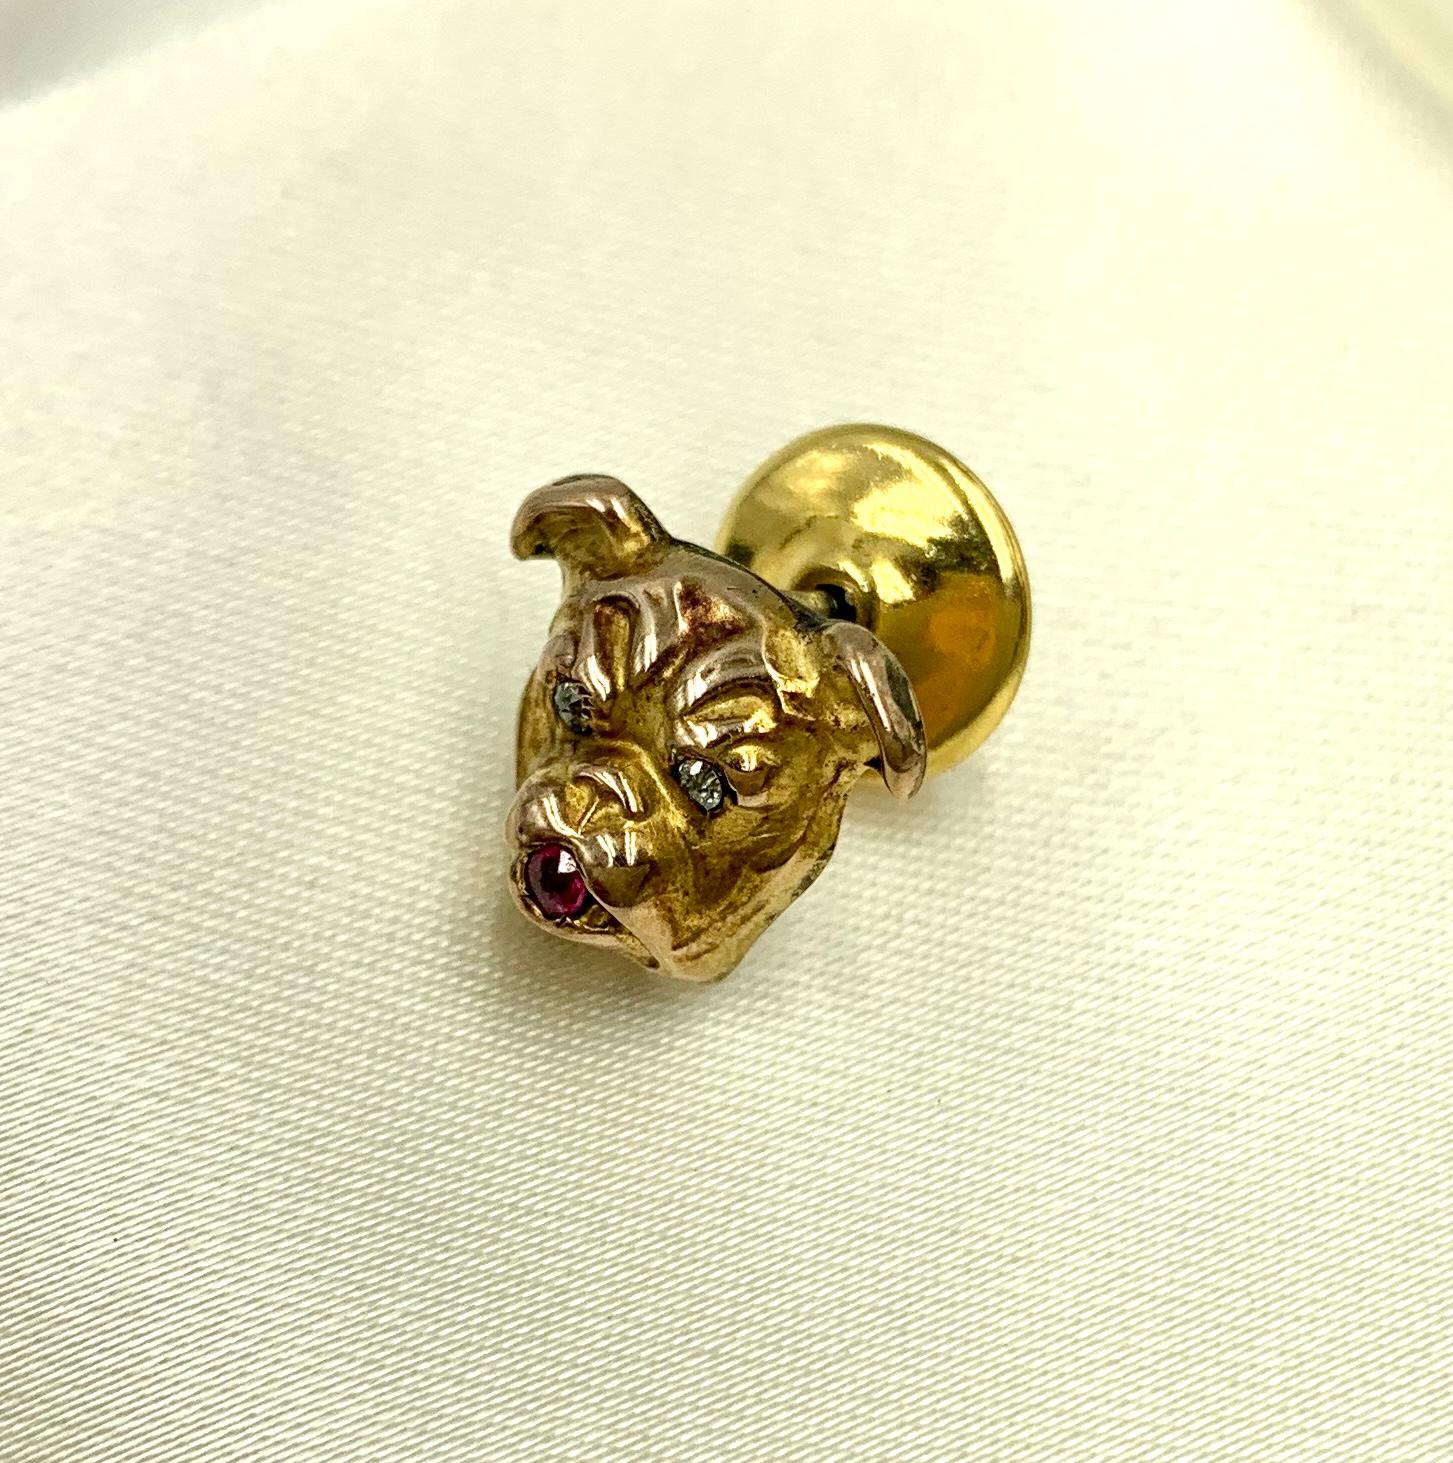 Excellent Antique Edwardian period English Bulldog Tie/Lapel pin, naturalistically modeled with diamond eyes and a ruby mouth. 
Wonderful quality 
Very Good Condition commensurate with age, nice patina to the gold
Likely converted from a stick pin